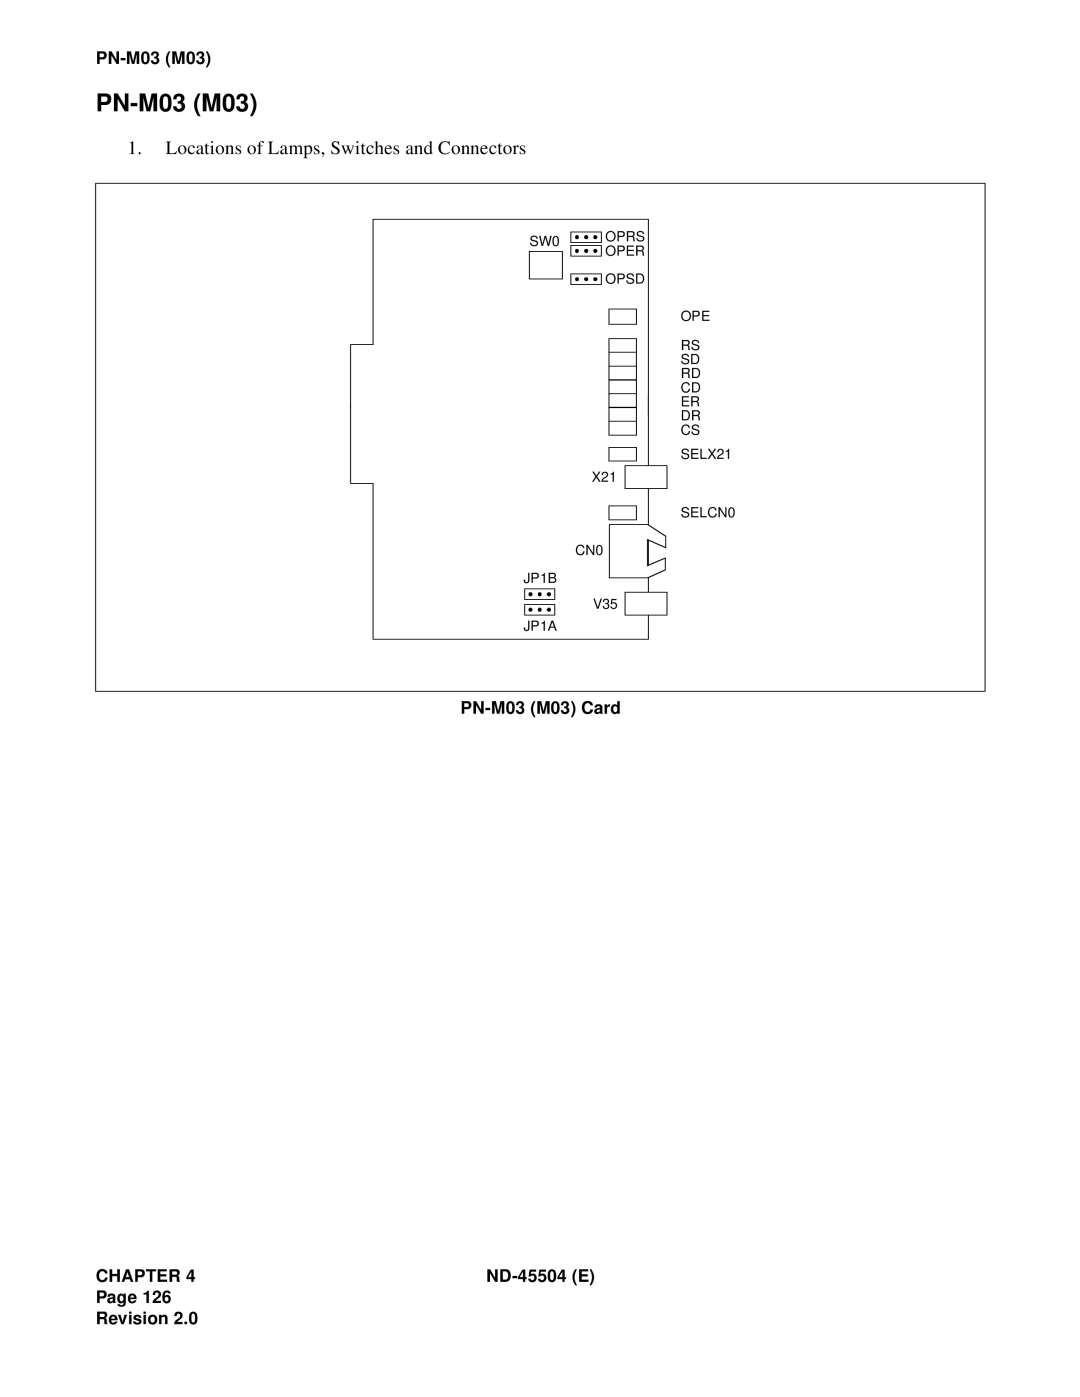 NEC 2000 IVS manual Locations of Lamps, Switches and Connectors, PN-M03M03 Card, Chapter, ND-45504E, Page Revision 